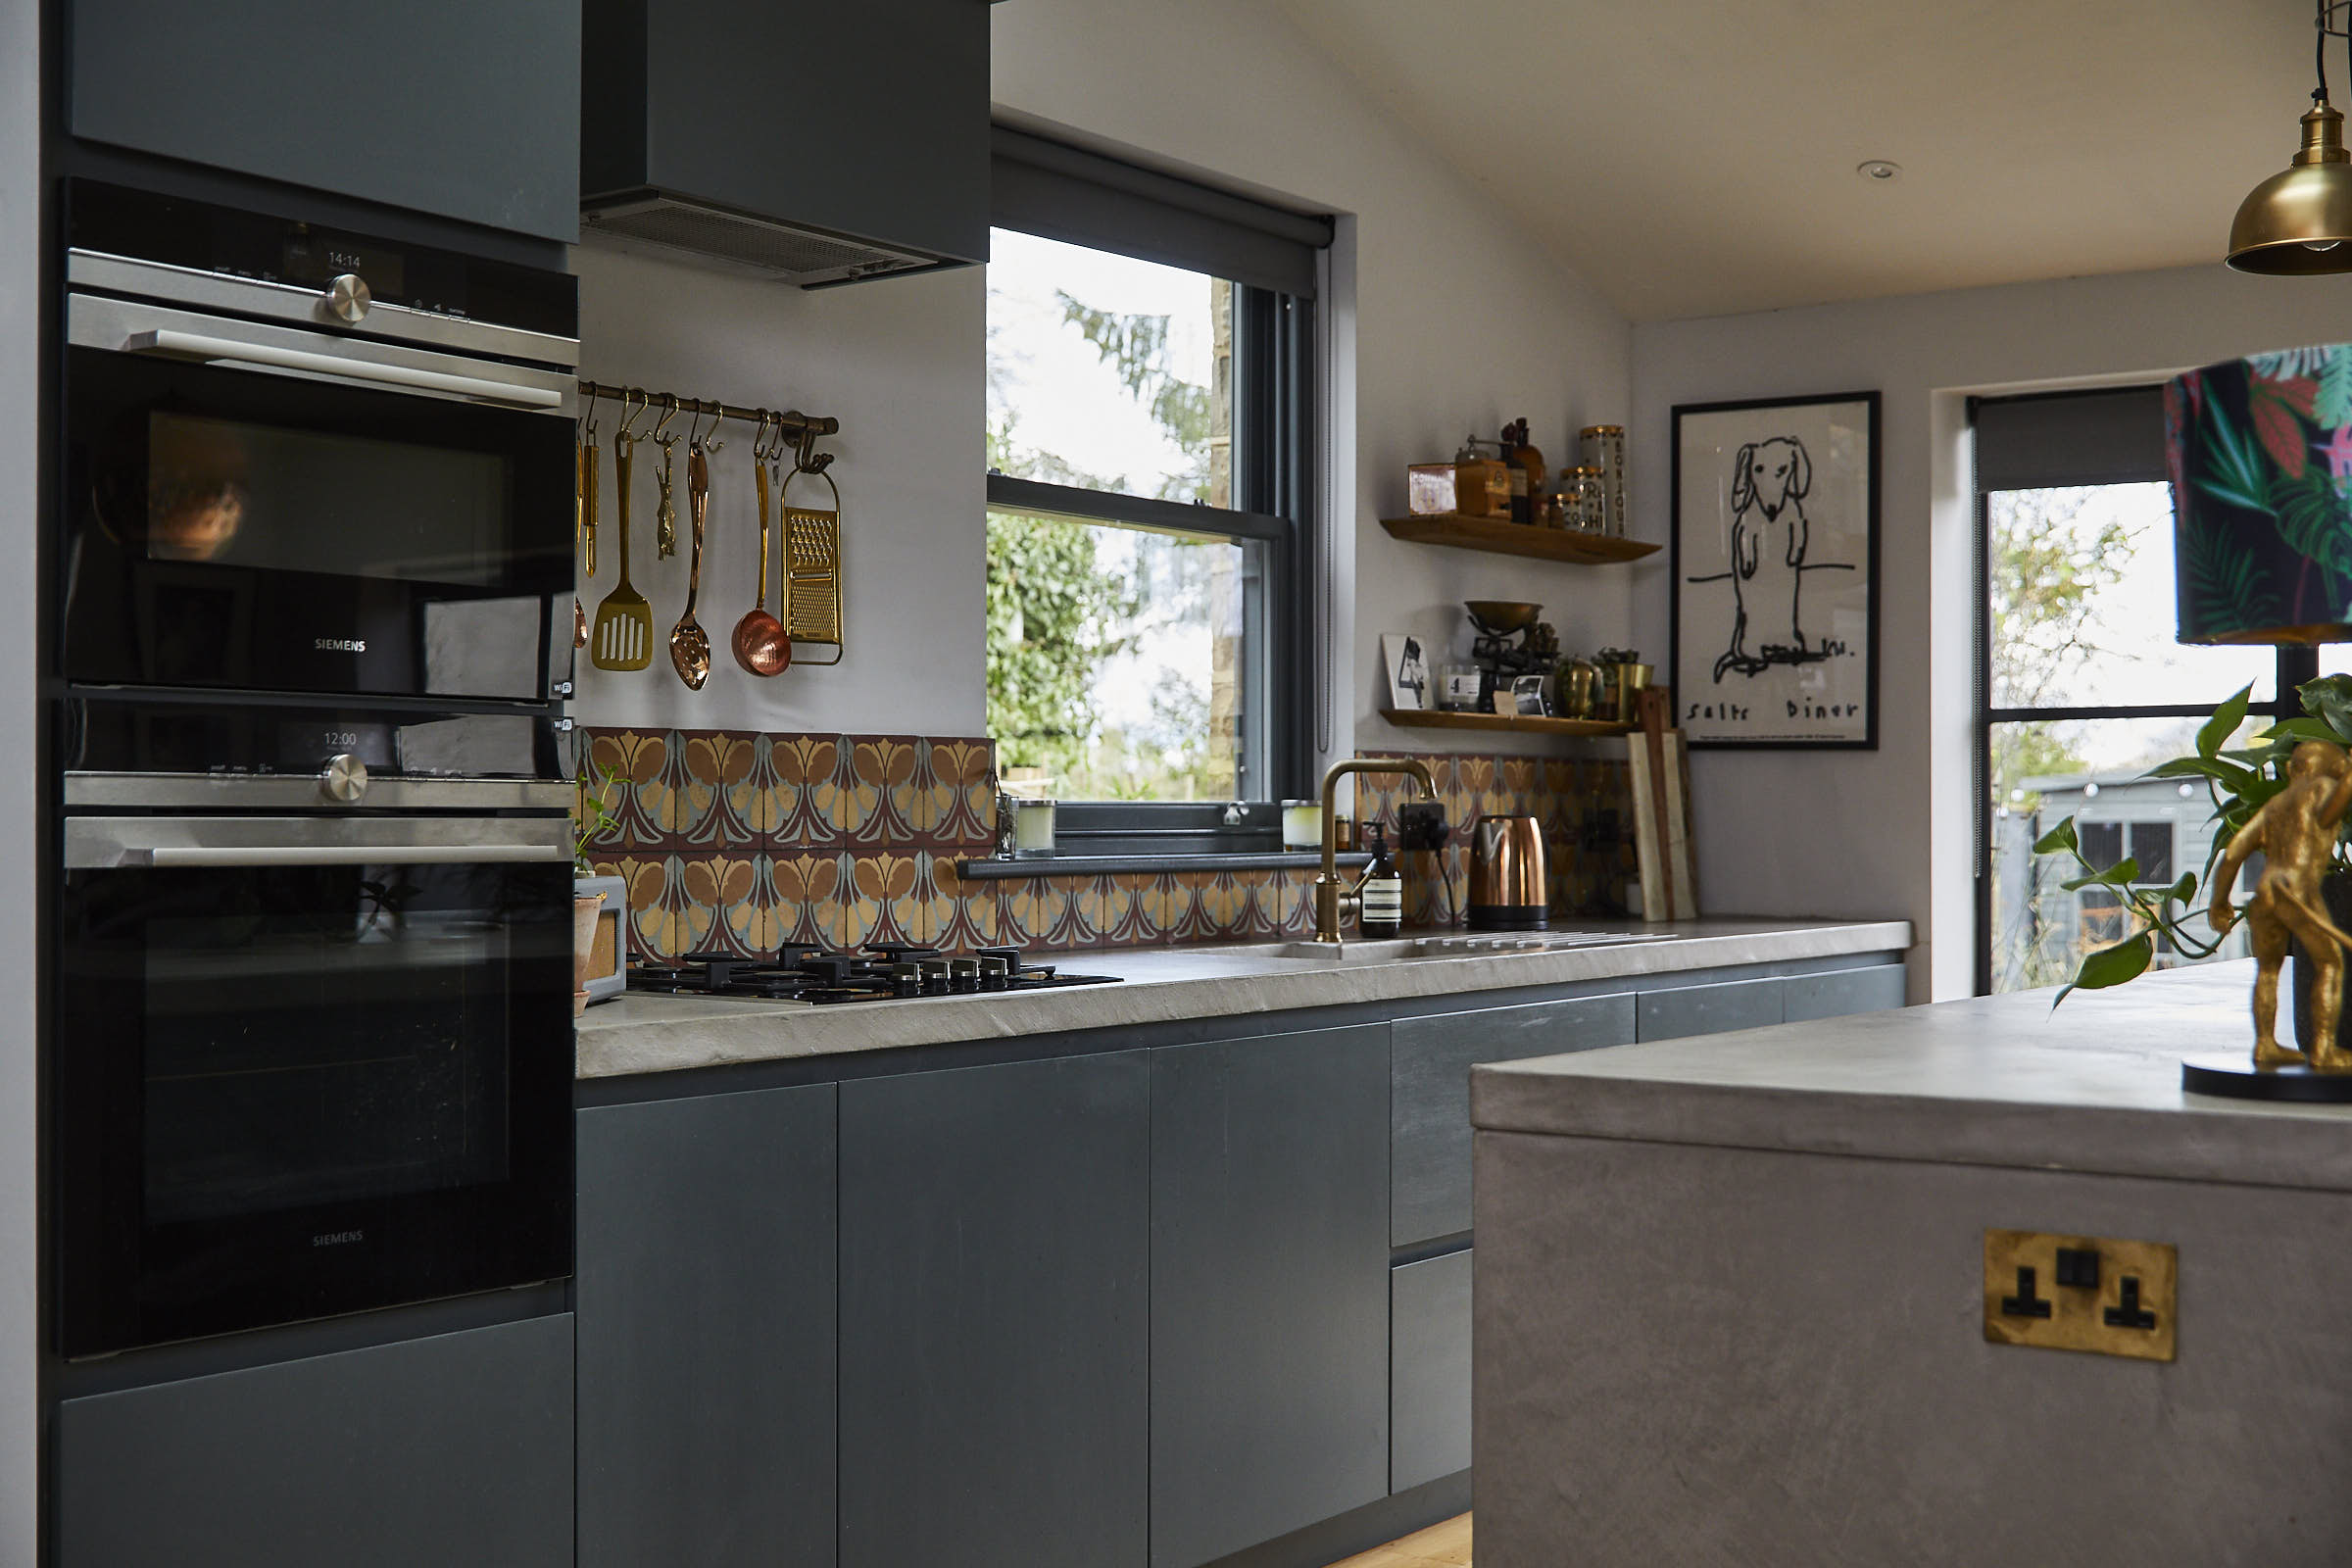 Bespoke painted kitchen with solid concrete worktops and colourful shell tiles